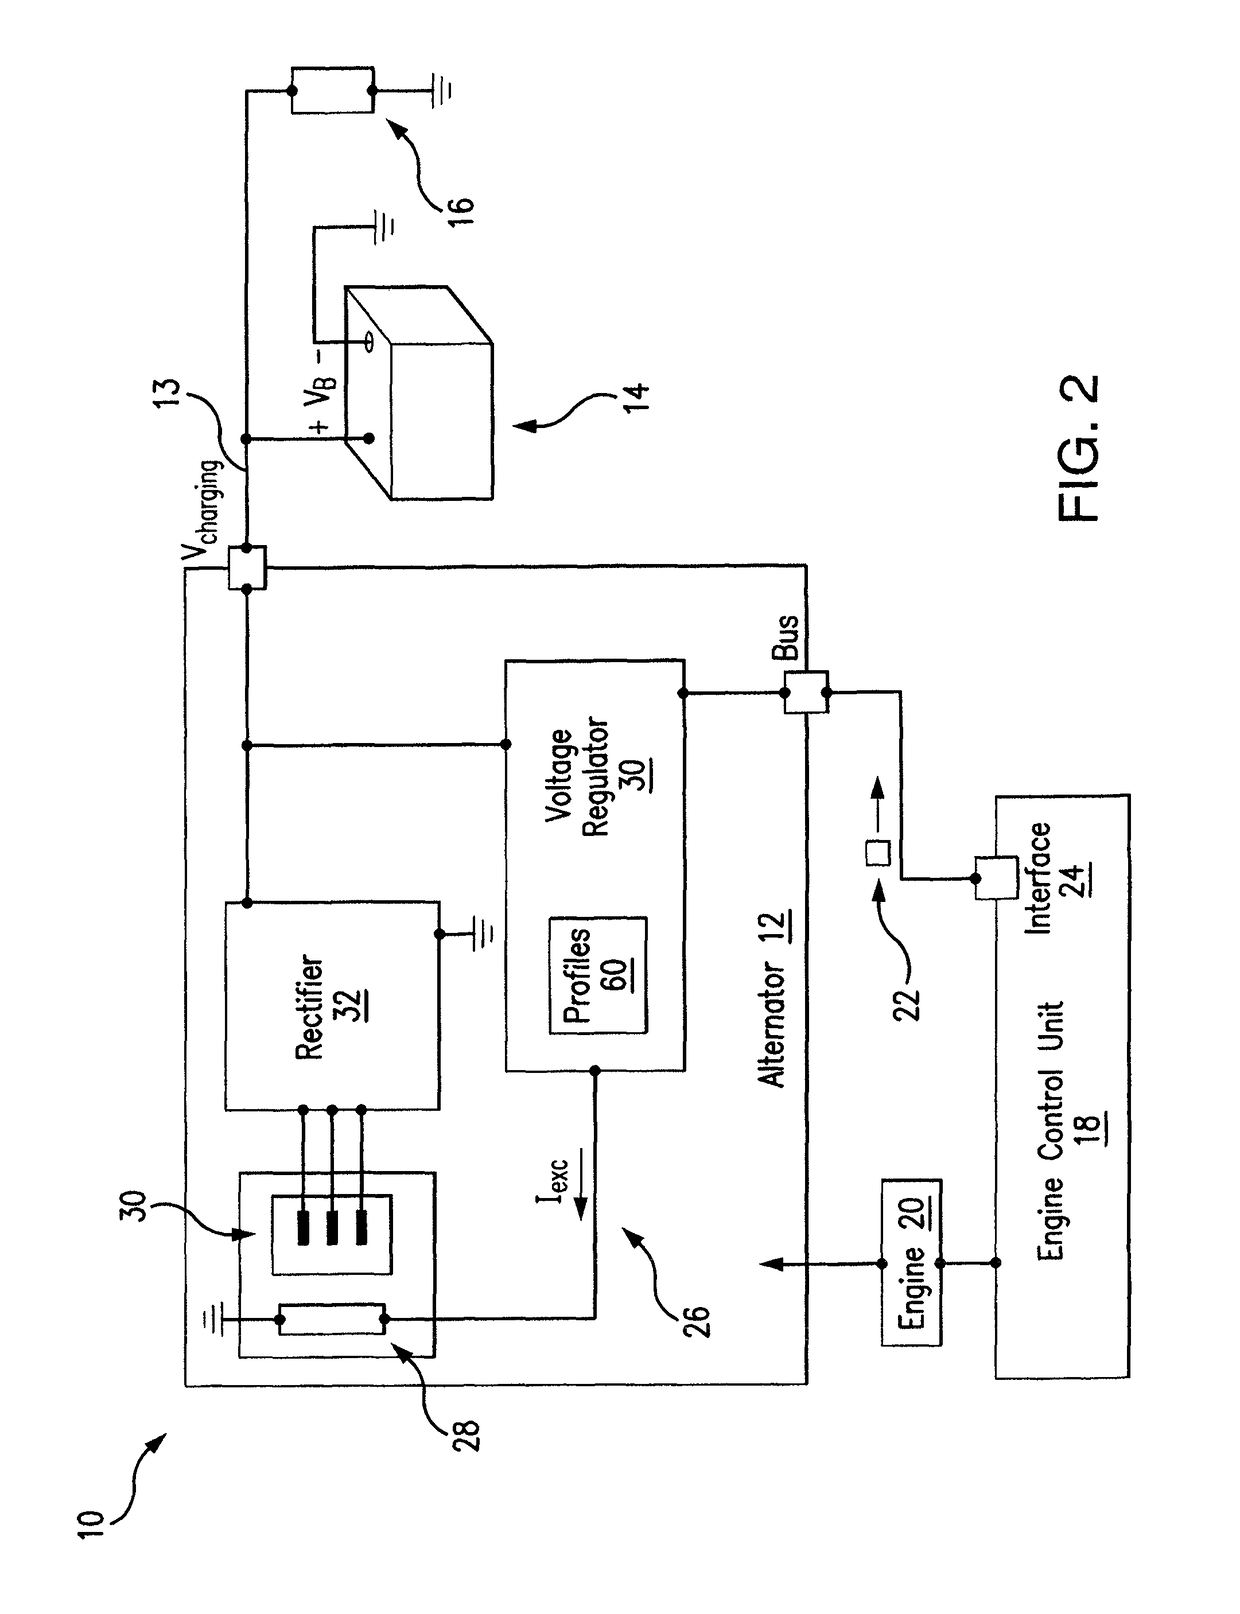 Alternator control with temperature-dependent safety feature